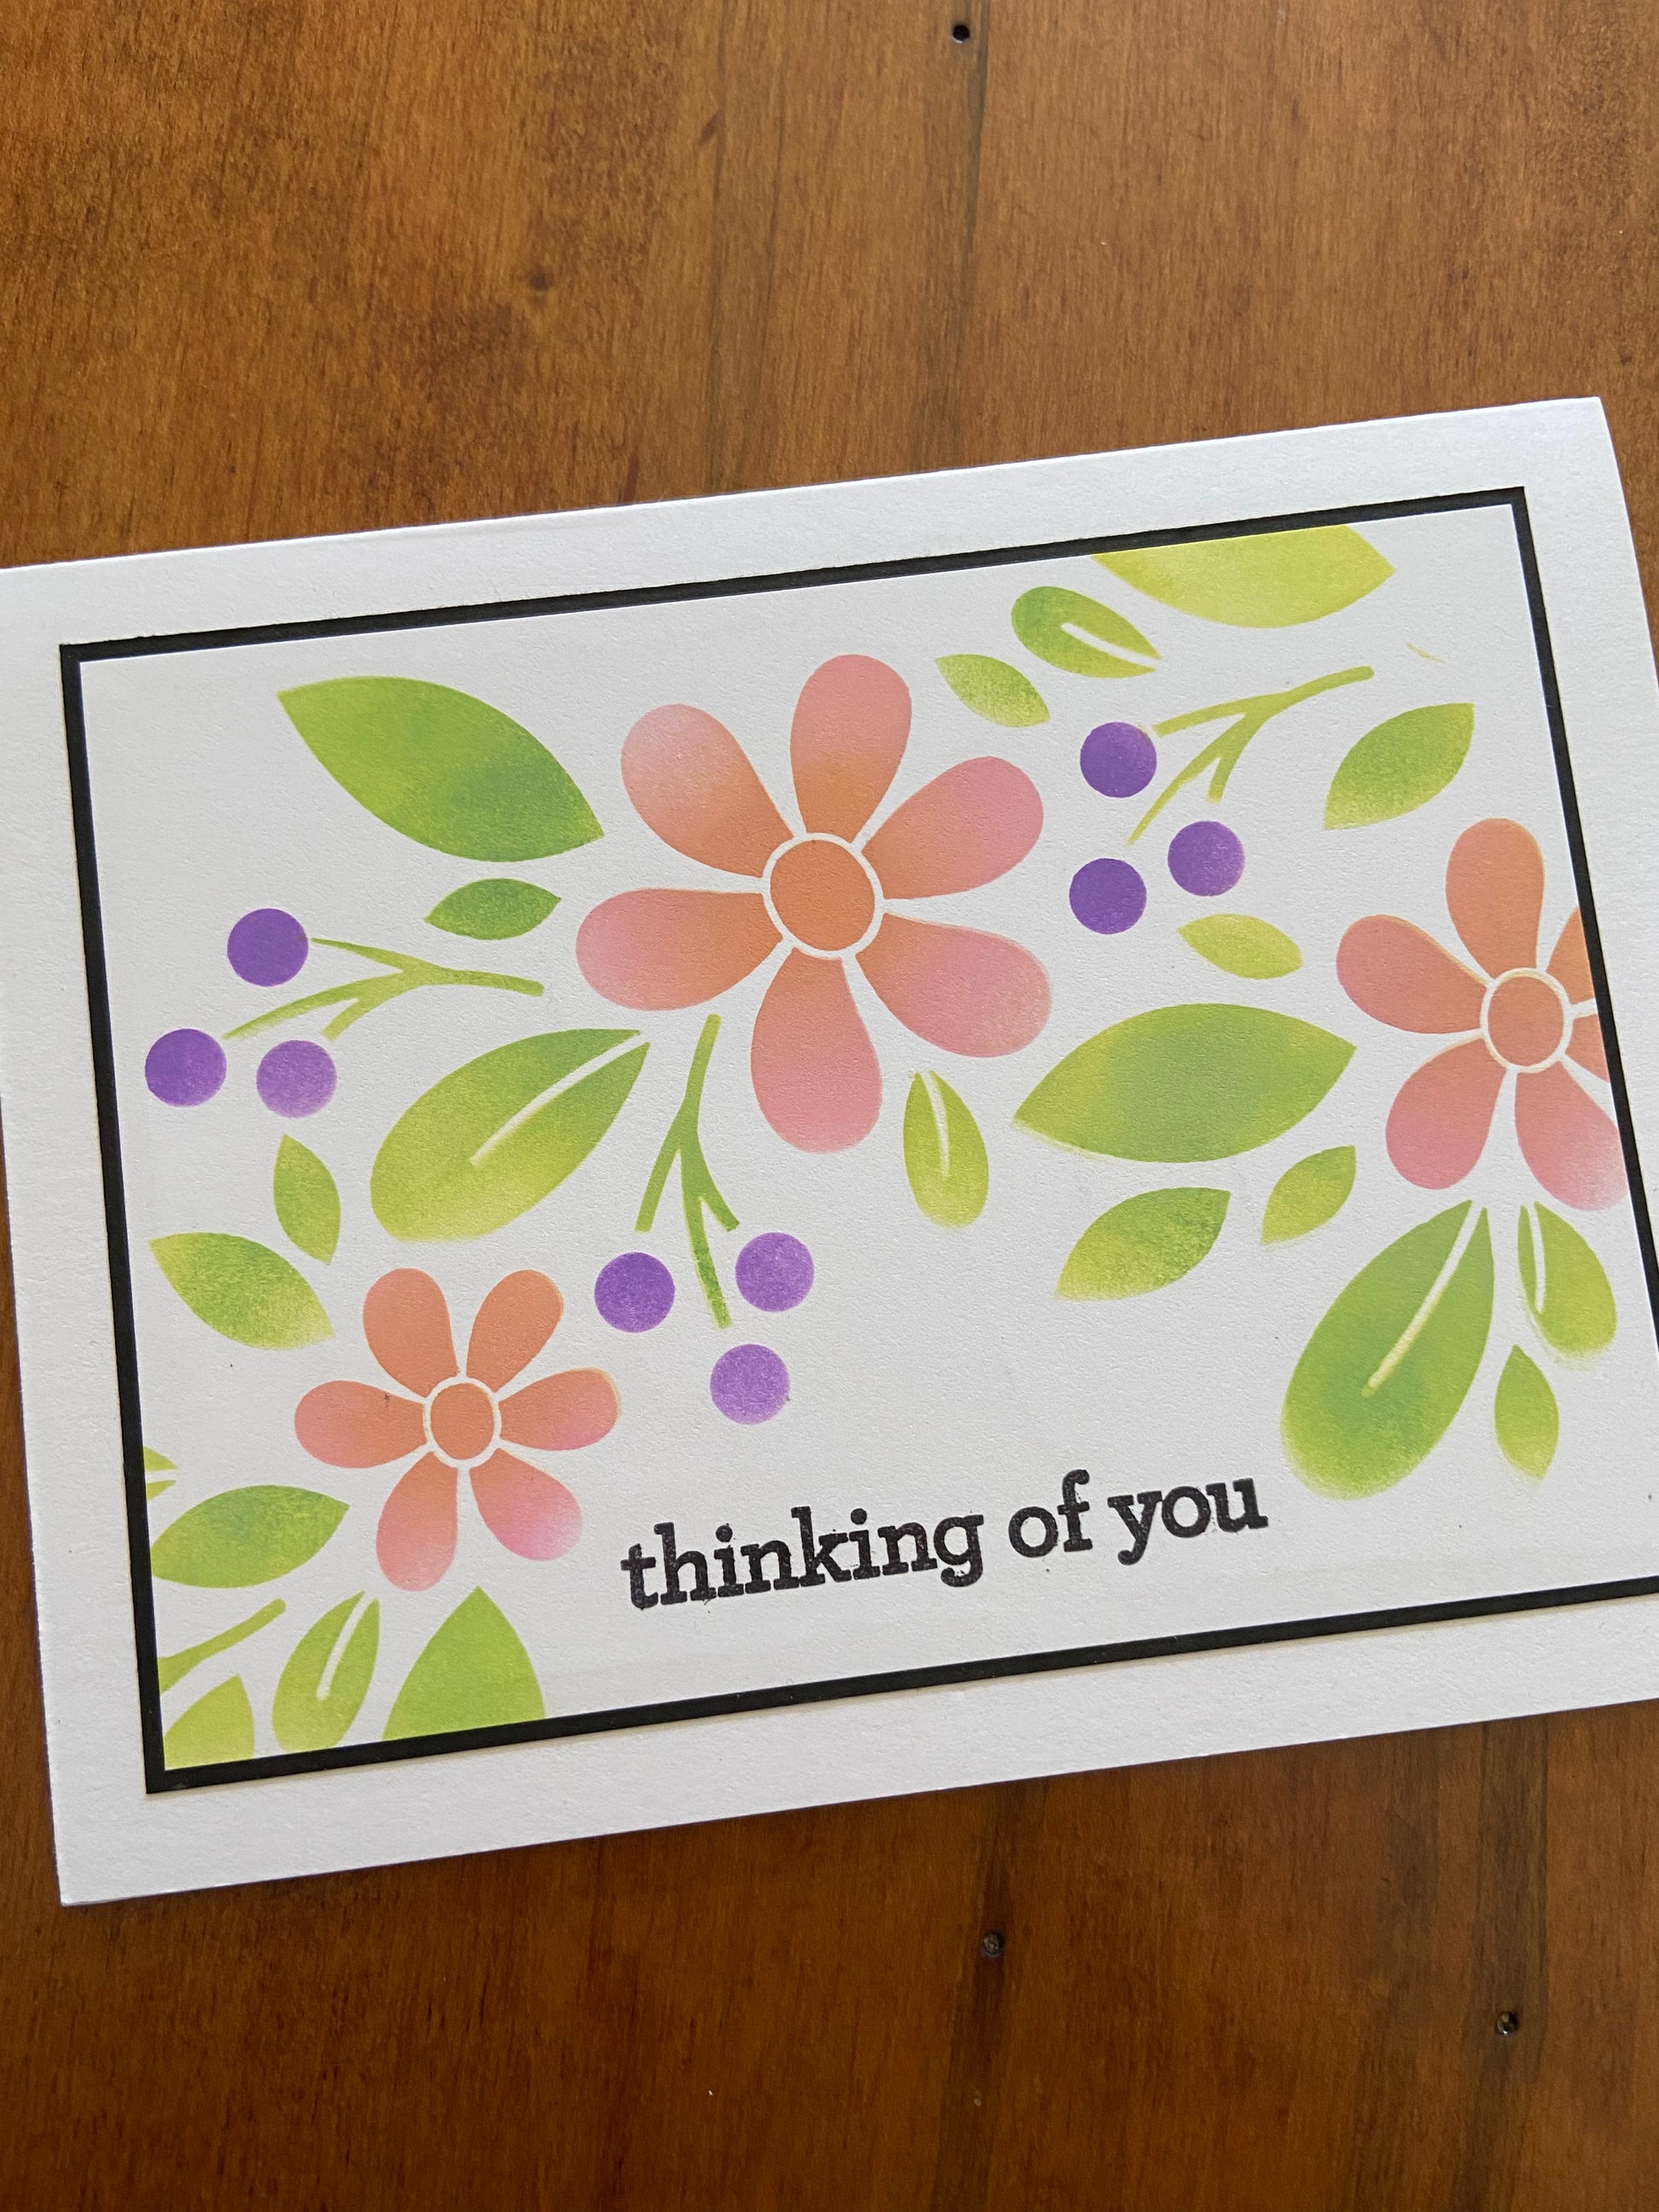 Floral thinking of you handmade card. Stencilled pink daisy like flowers with greenery and purple berries. 